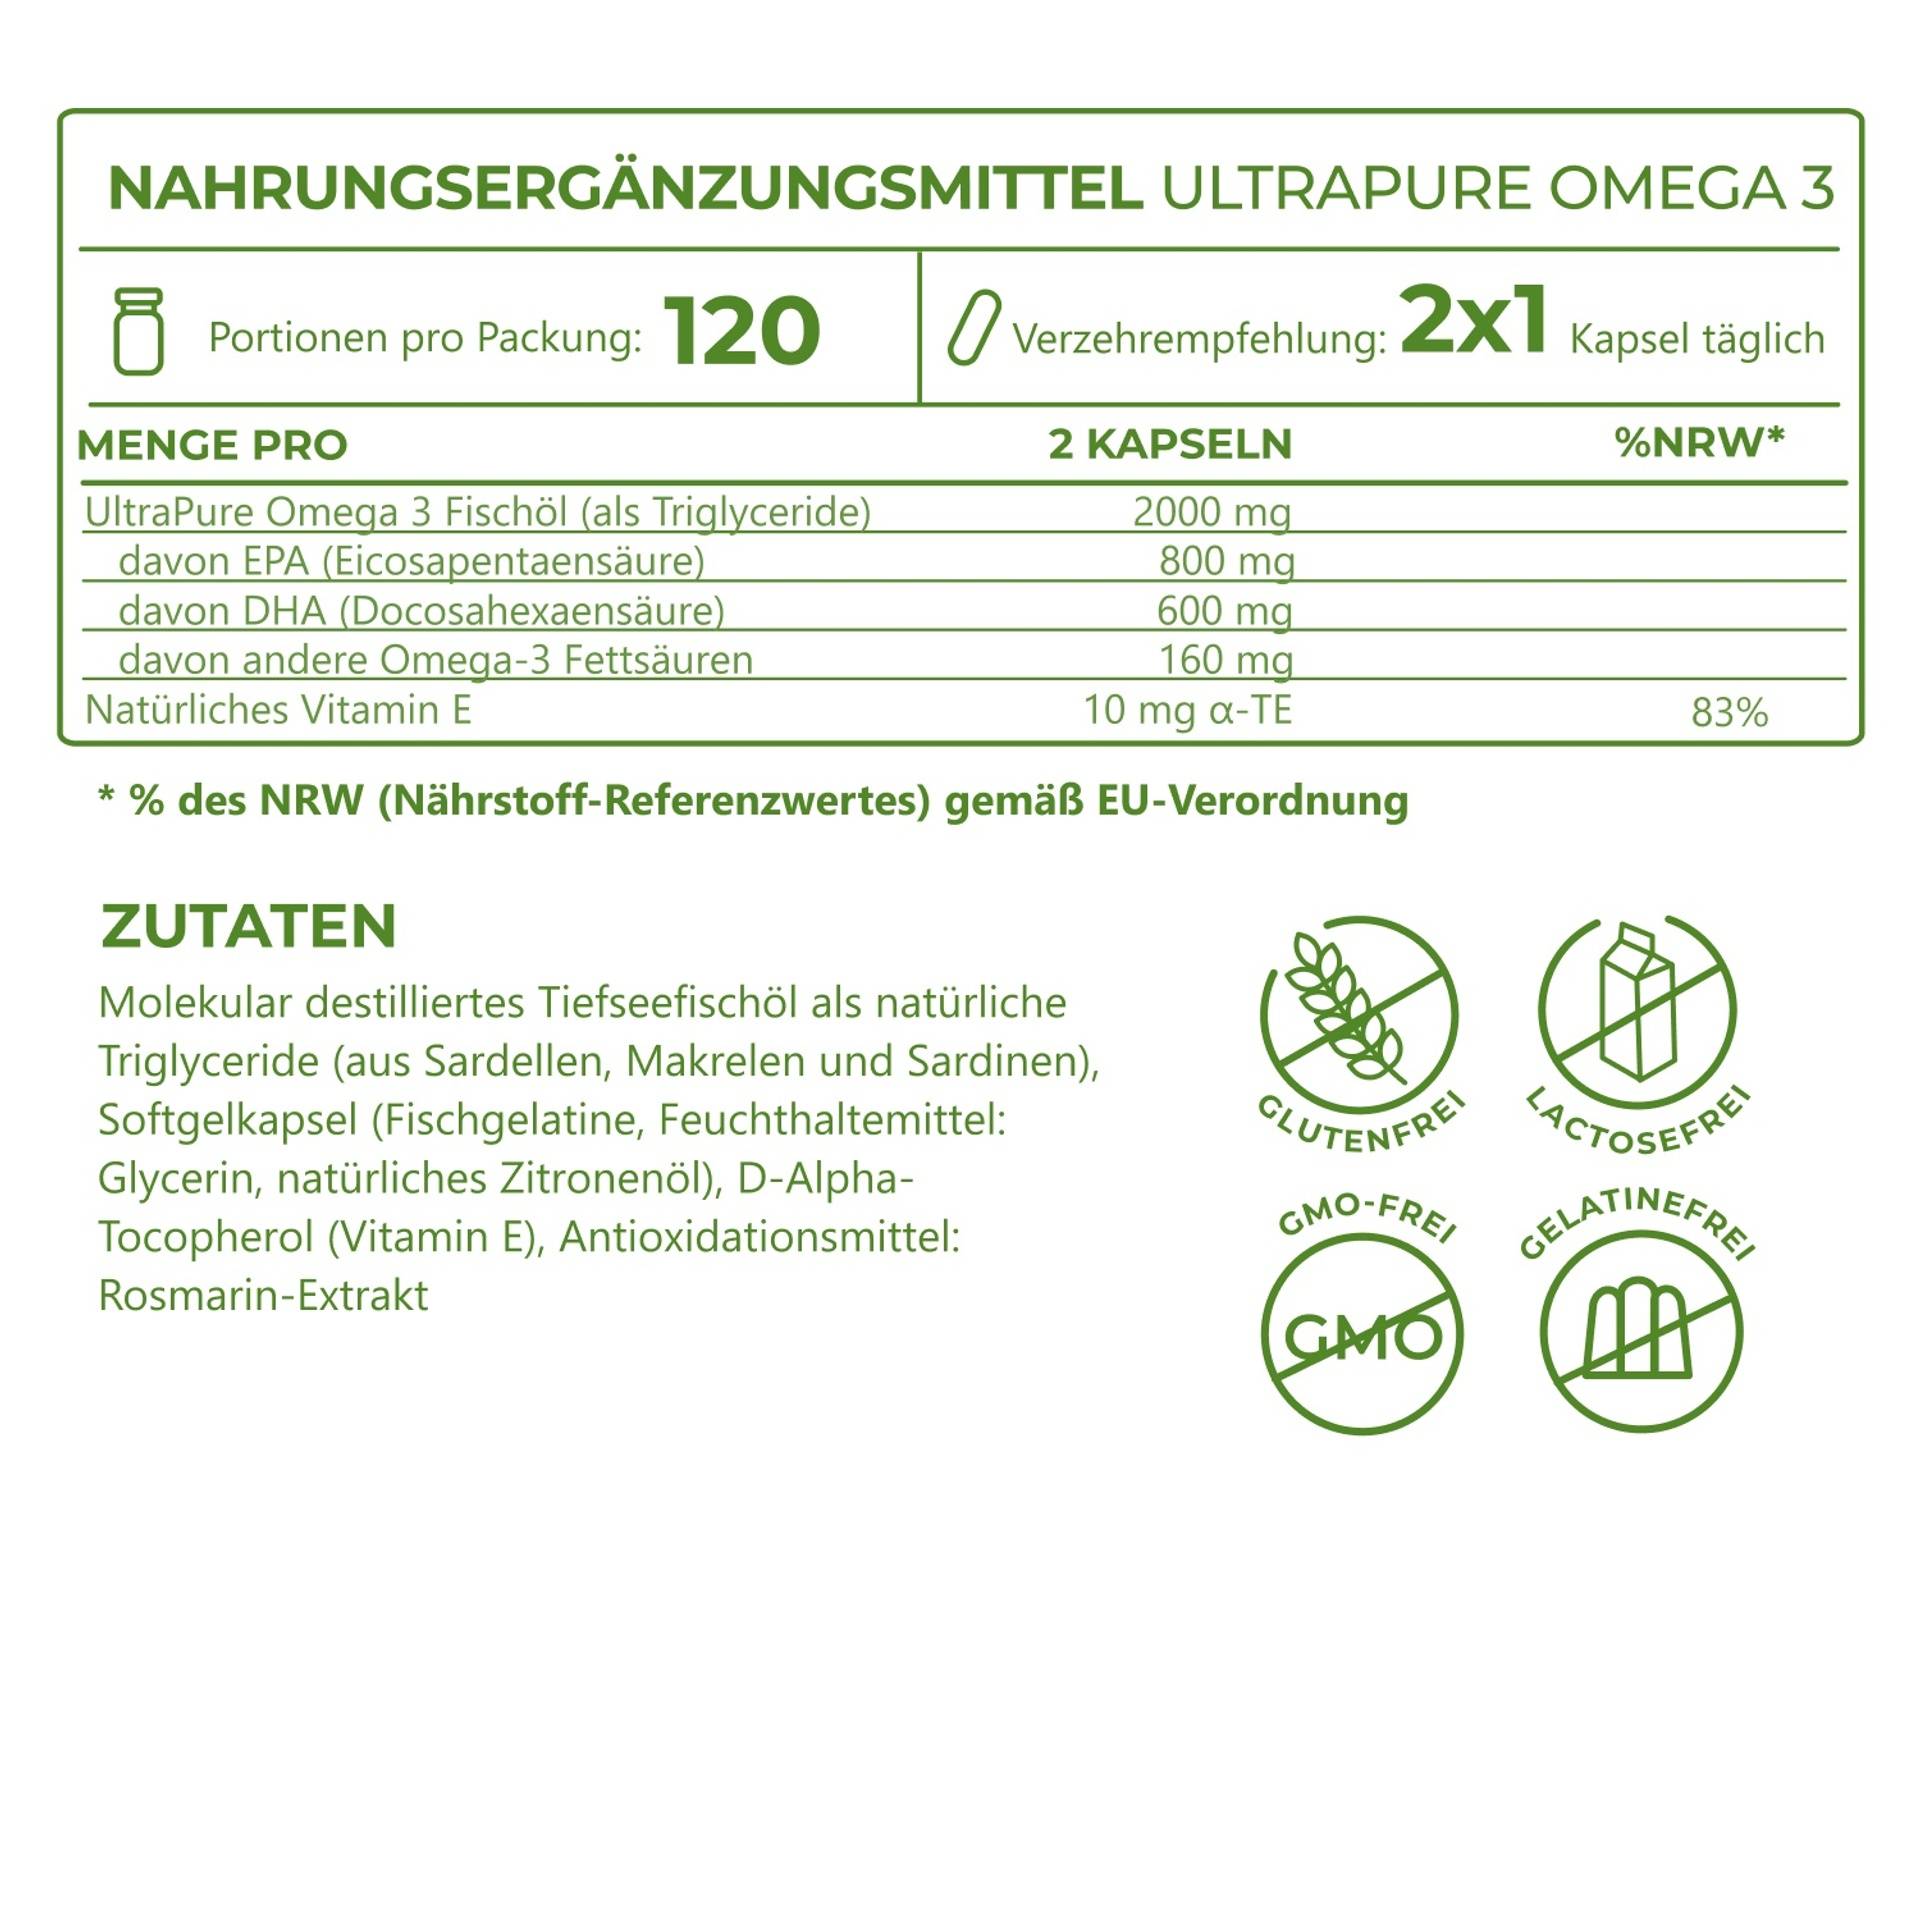 5_Ingredients_Ultrapure Omega 3_6852-04.png